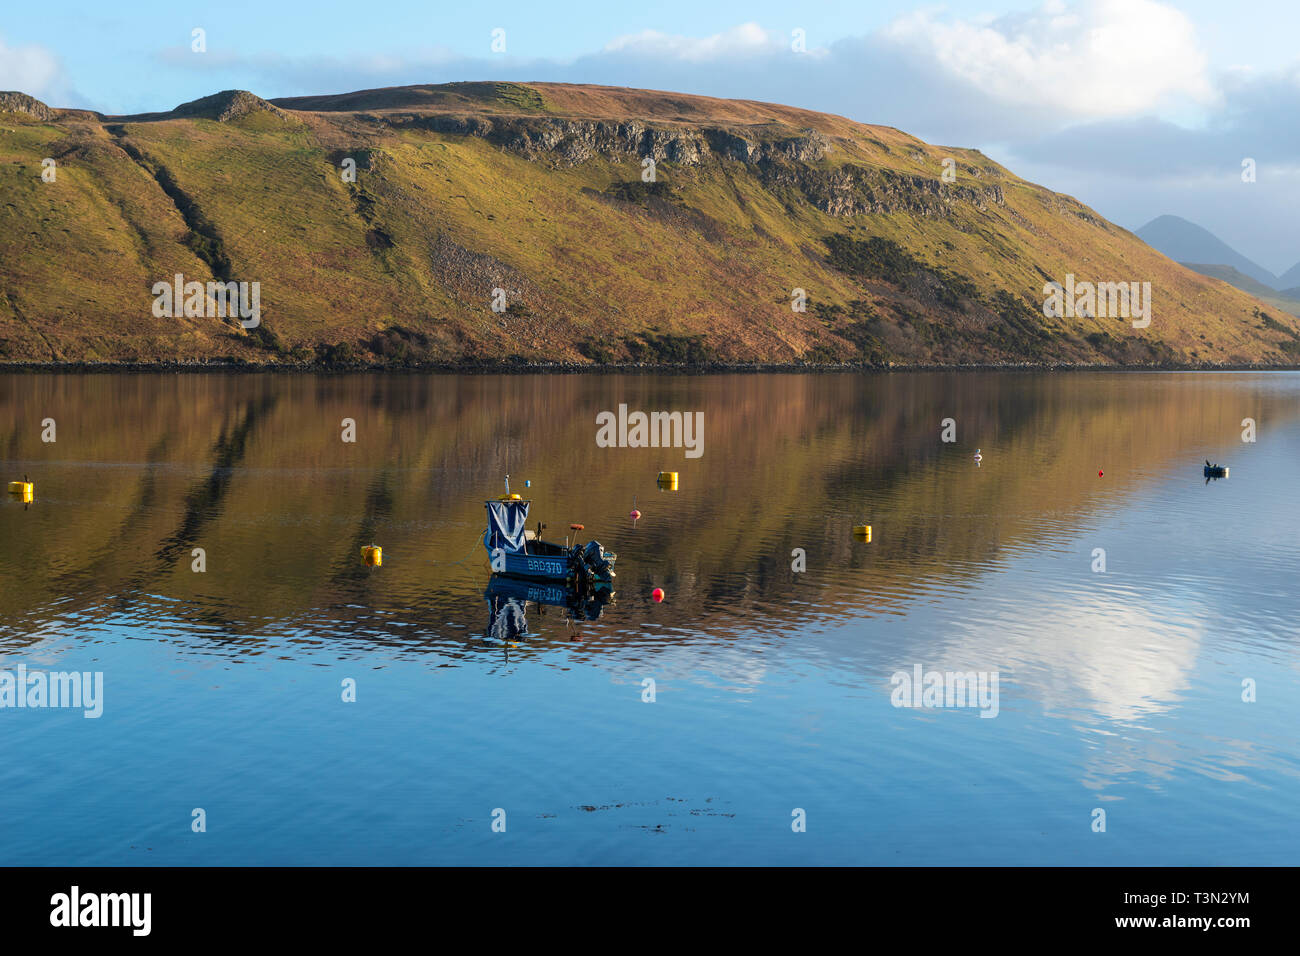 Colourful reflections in the calm water of Loch Harport on Isle of Skye, Highland Region, Scotland, UK Stock Photo